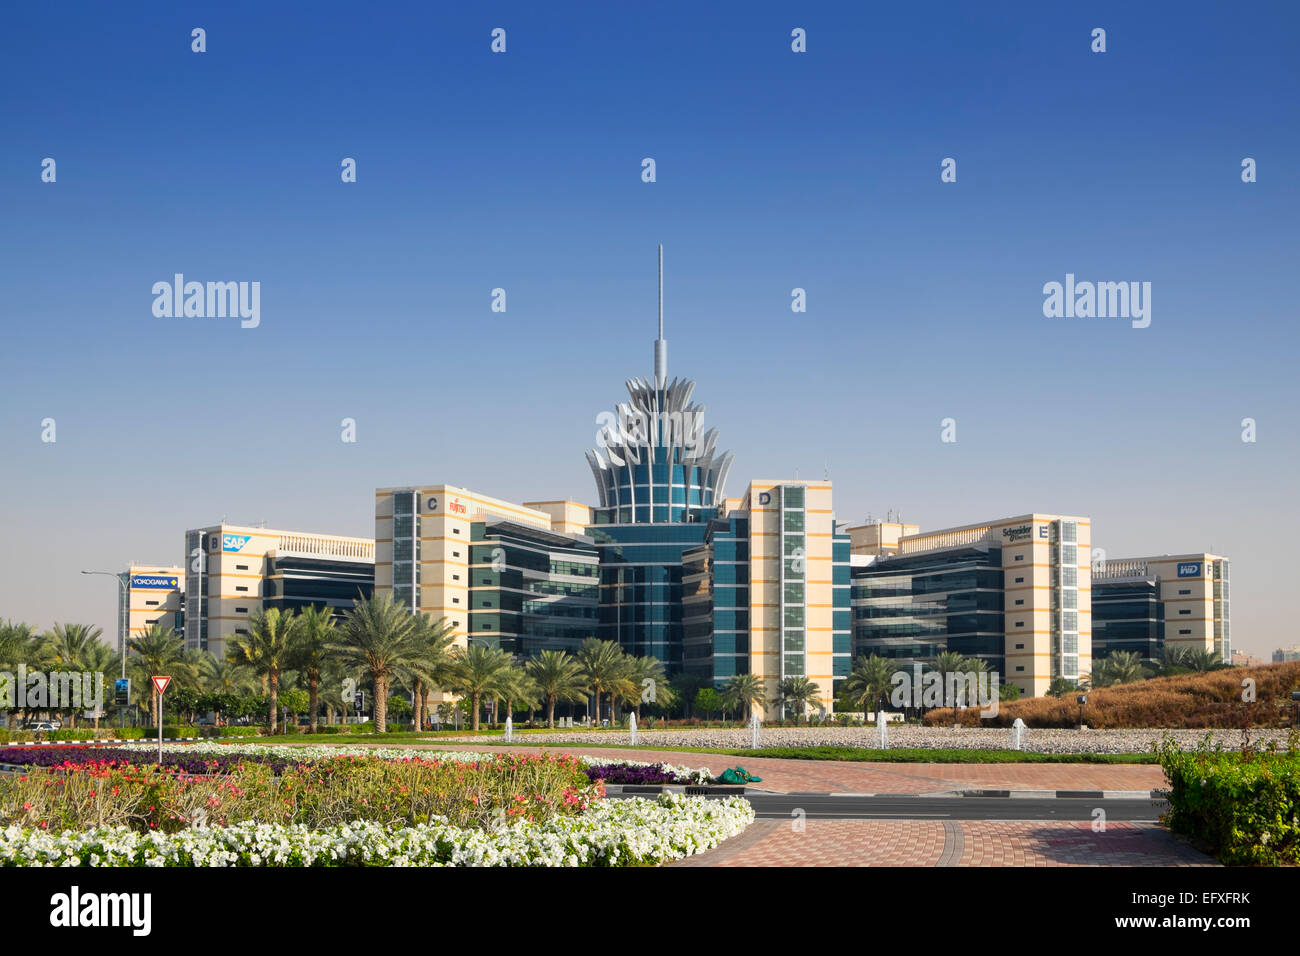 Pineapple building at Silicon Oasis Business Park in Dubai united Arab Emirates Stock Photo